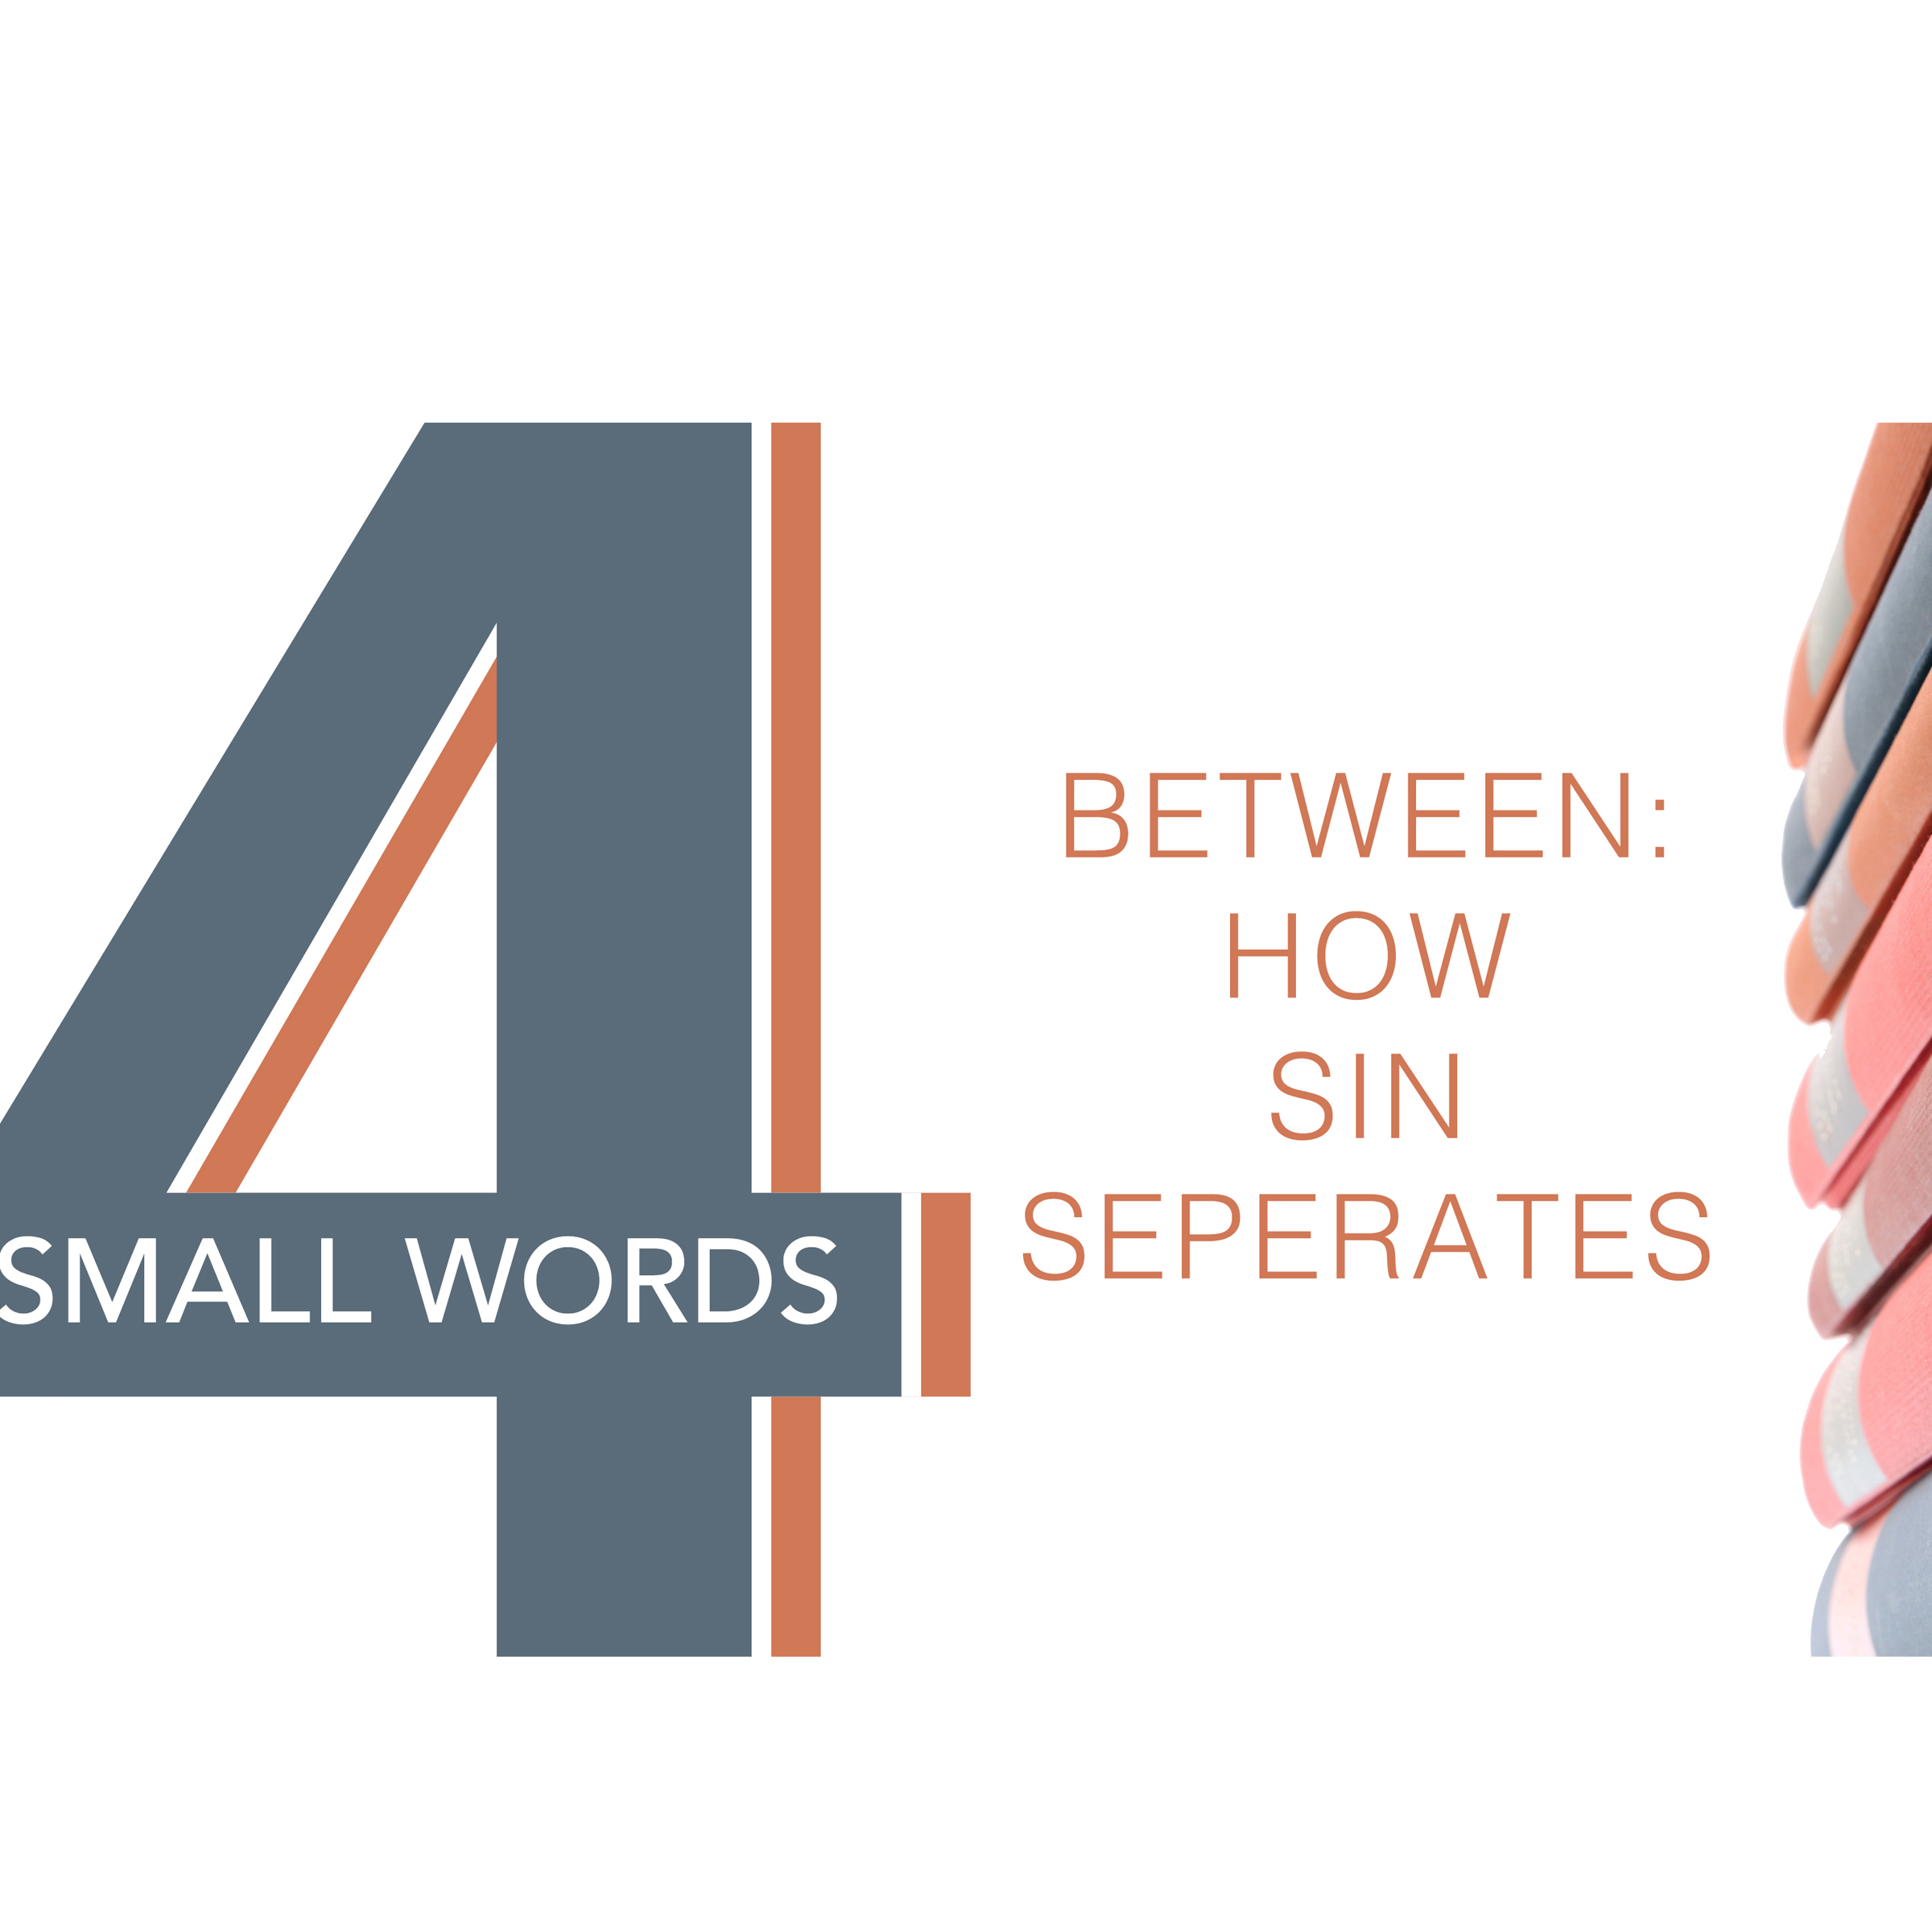 4 Small Words: Between- How Sin Separates